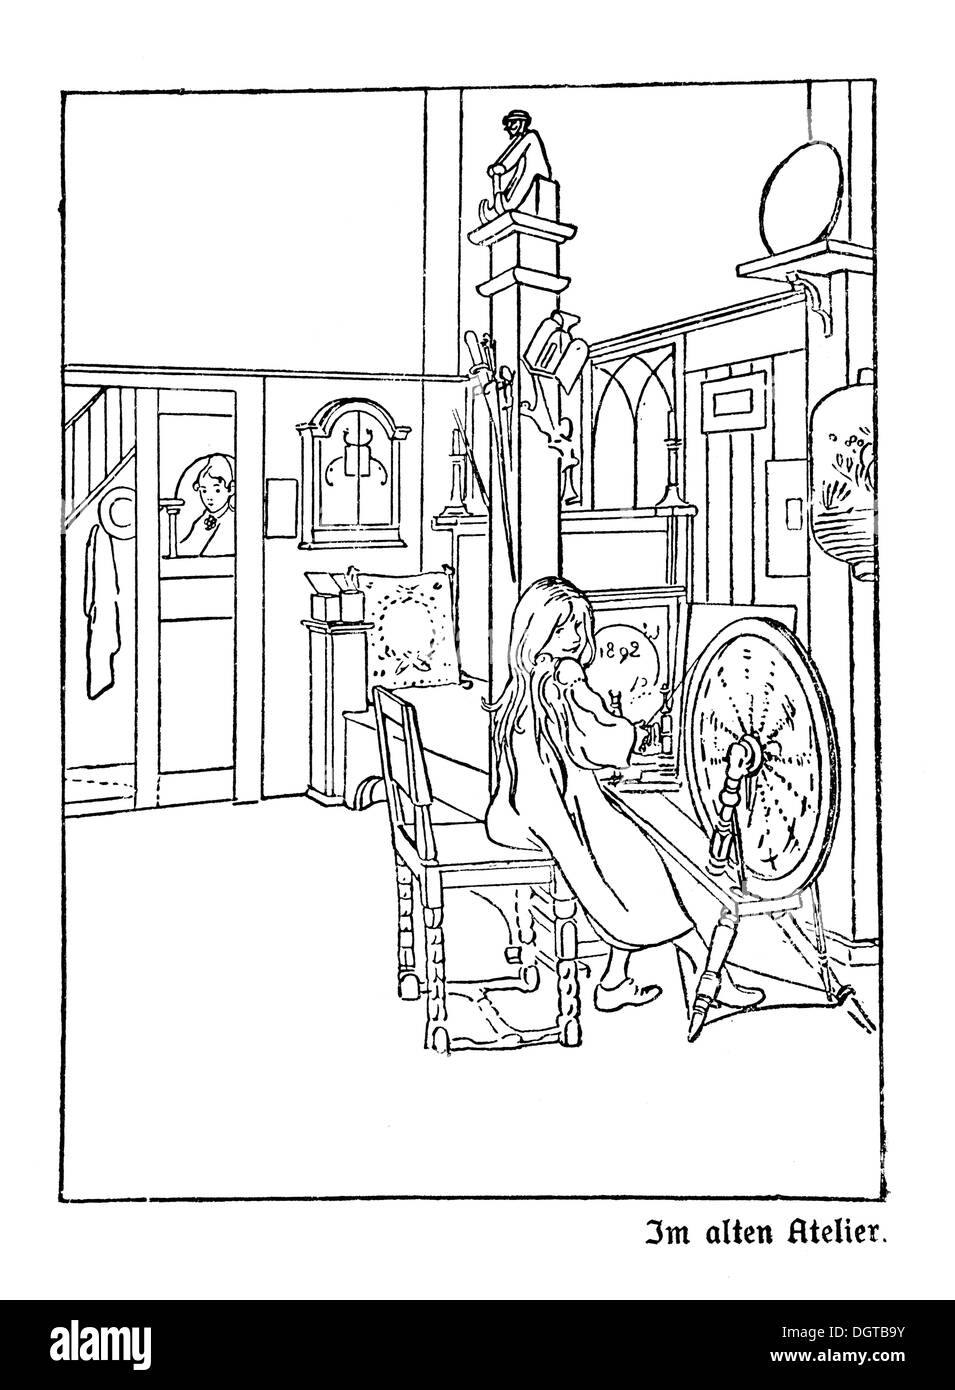 In the old studio, illustration in The House in the Sun by Carl Larsson, 1917 Stock Photo